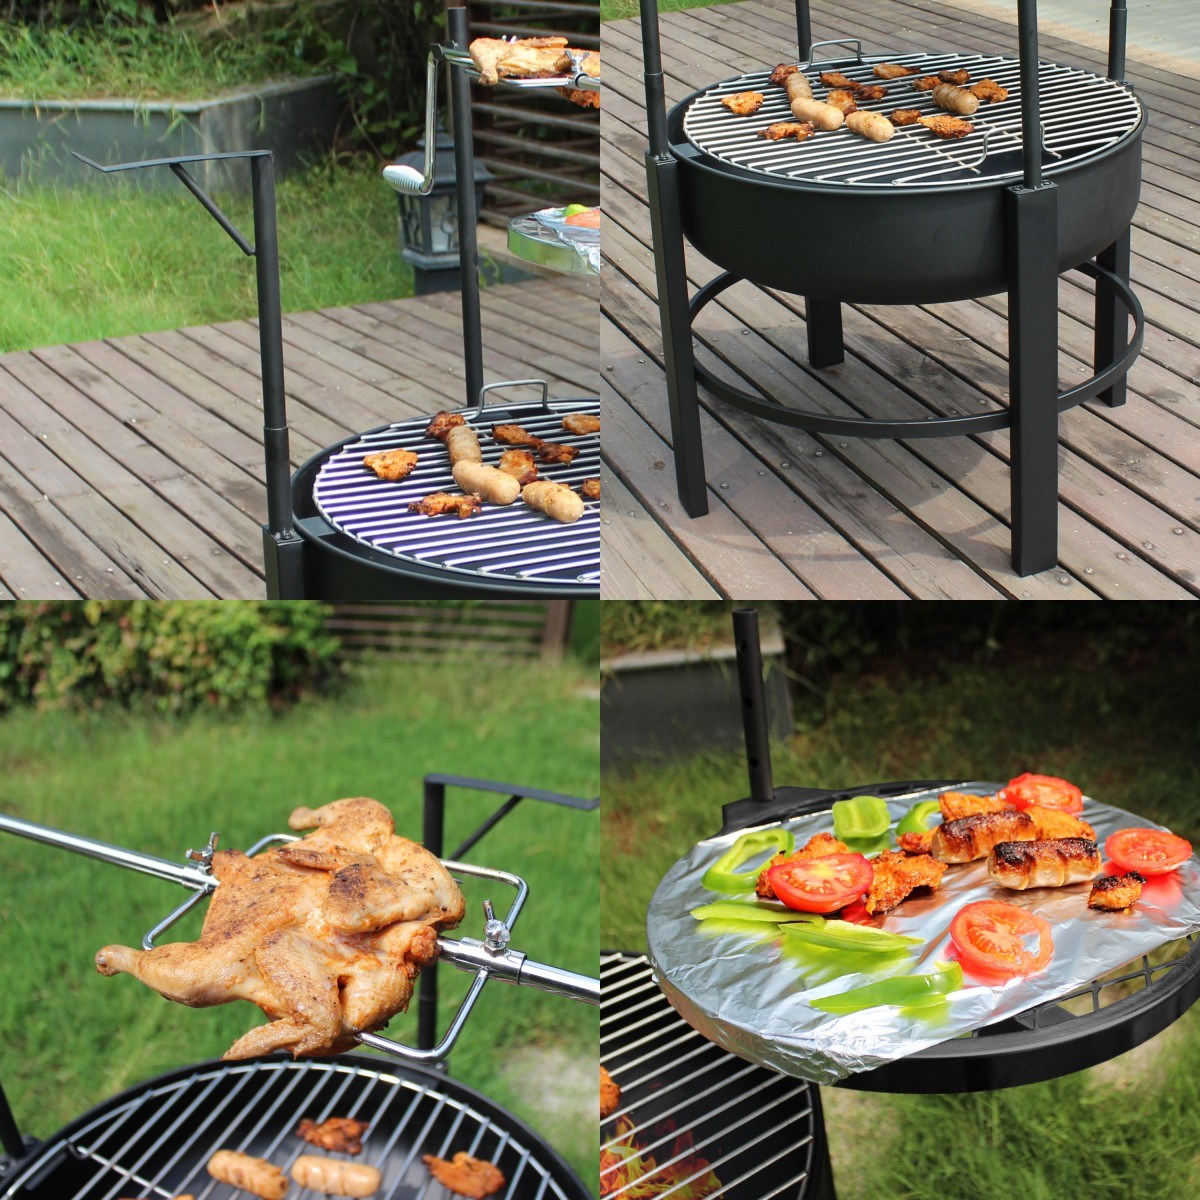 Round Metal Wood Burning Firepit with Surrounding Removable Cooking Grill